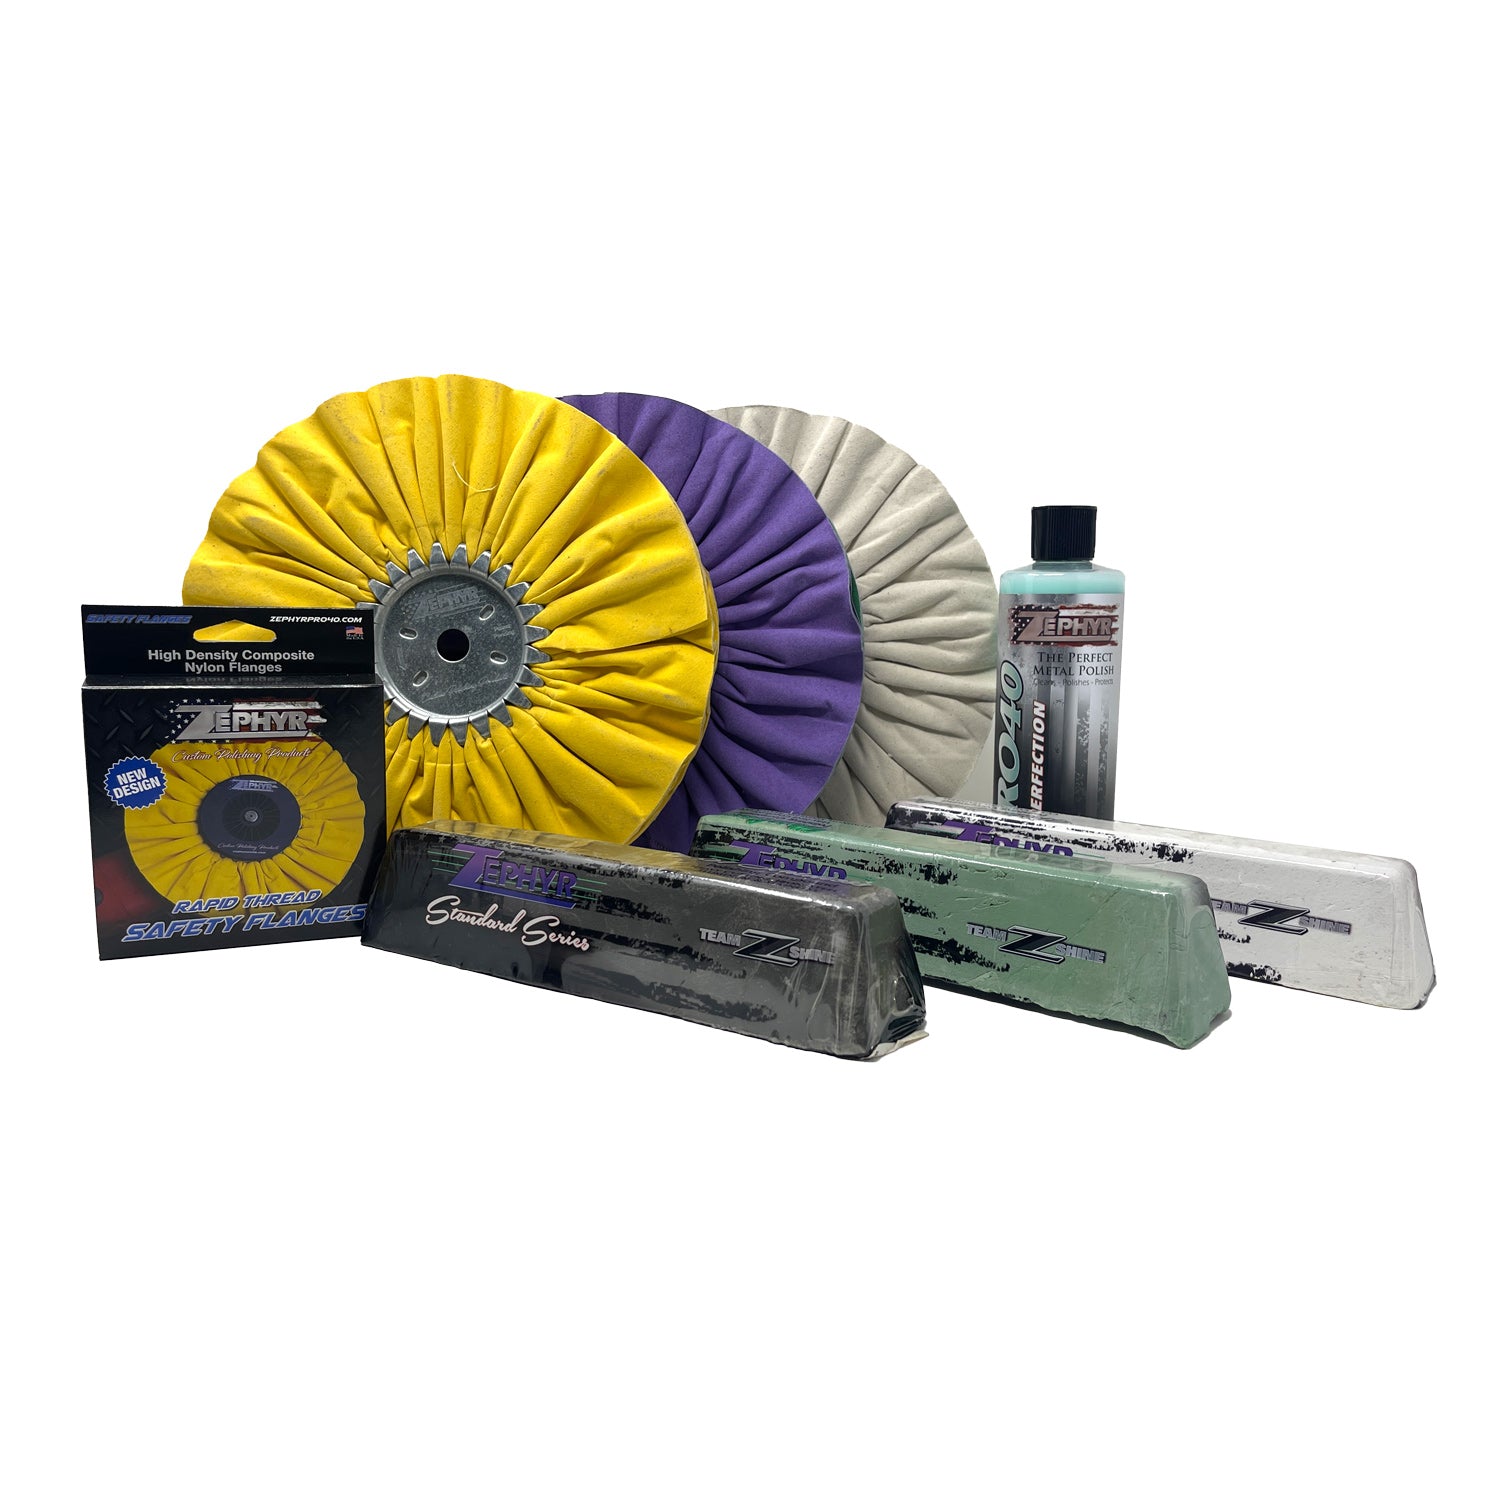 Polishing Aluminium and Steels with a Bench Grinder Metal Polishing Kit. 